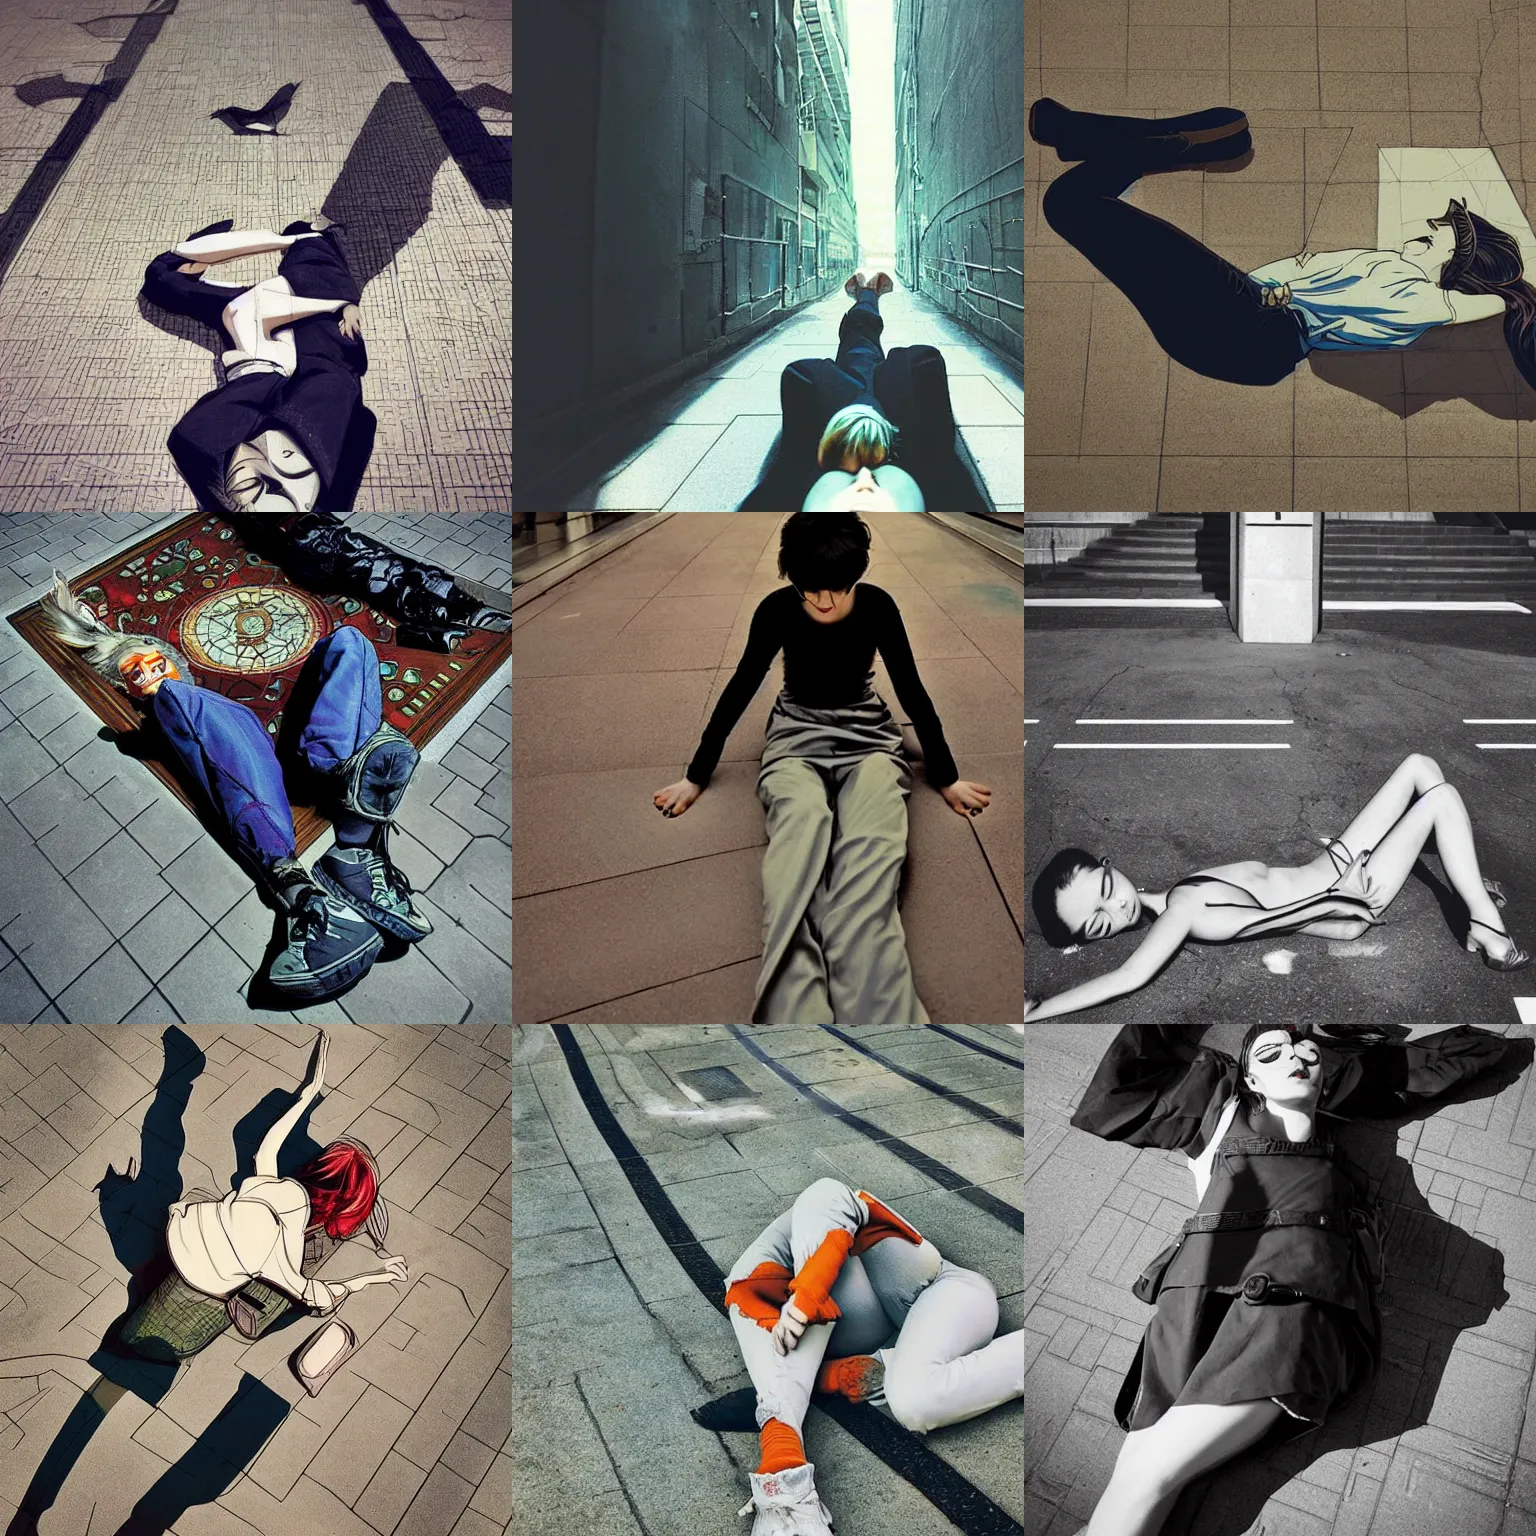 Prompt: beautiful bird perspective, lying on ground pose full body portrait photo in style of 1990s frontiers in retrofuturism tokyo seinen manga shri yantra street photography fashion wachowski edition, highly detailed, focus on pursed lips, eye contact, soft lighting